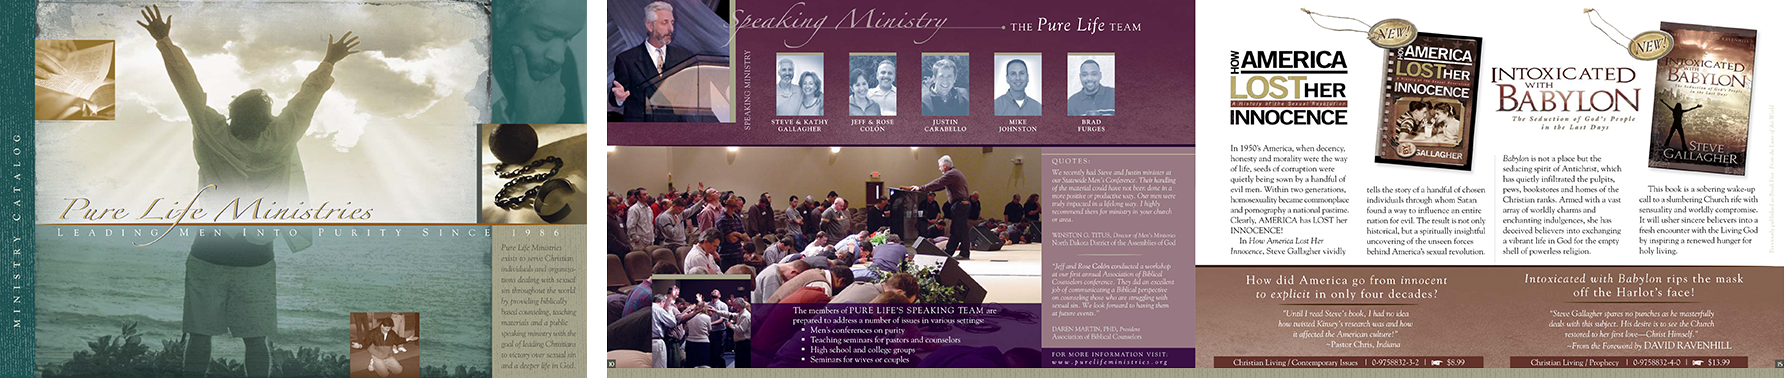 designpoint-brochures-pure-life-ministries